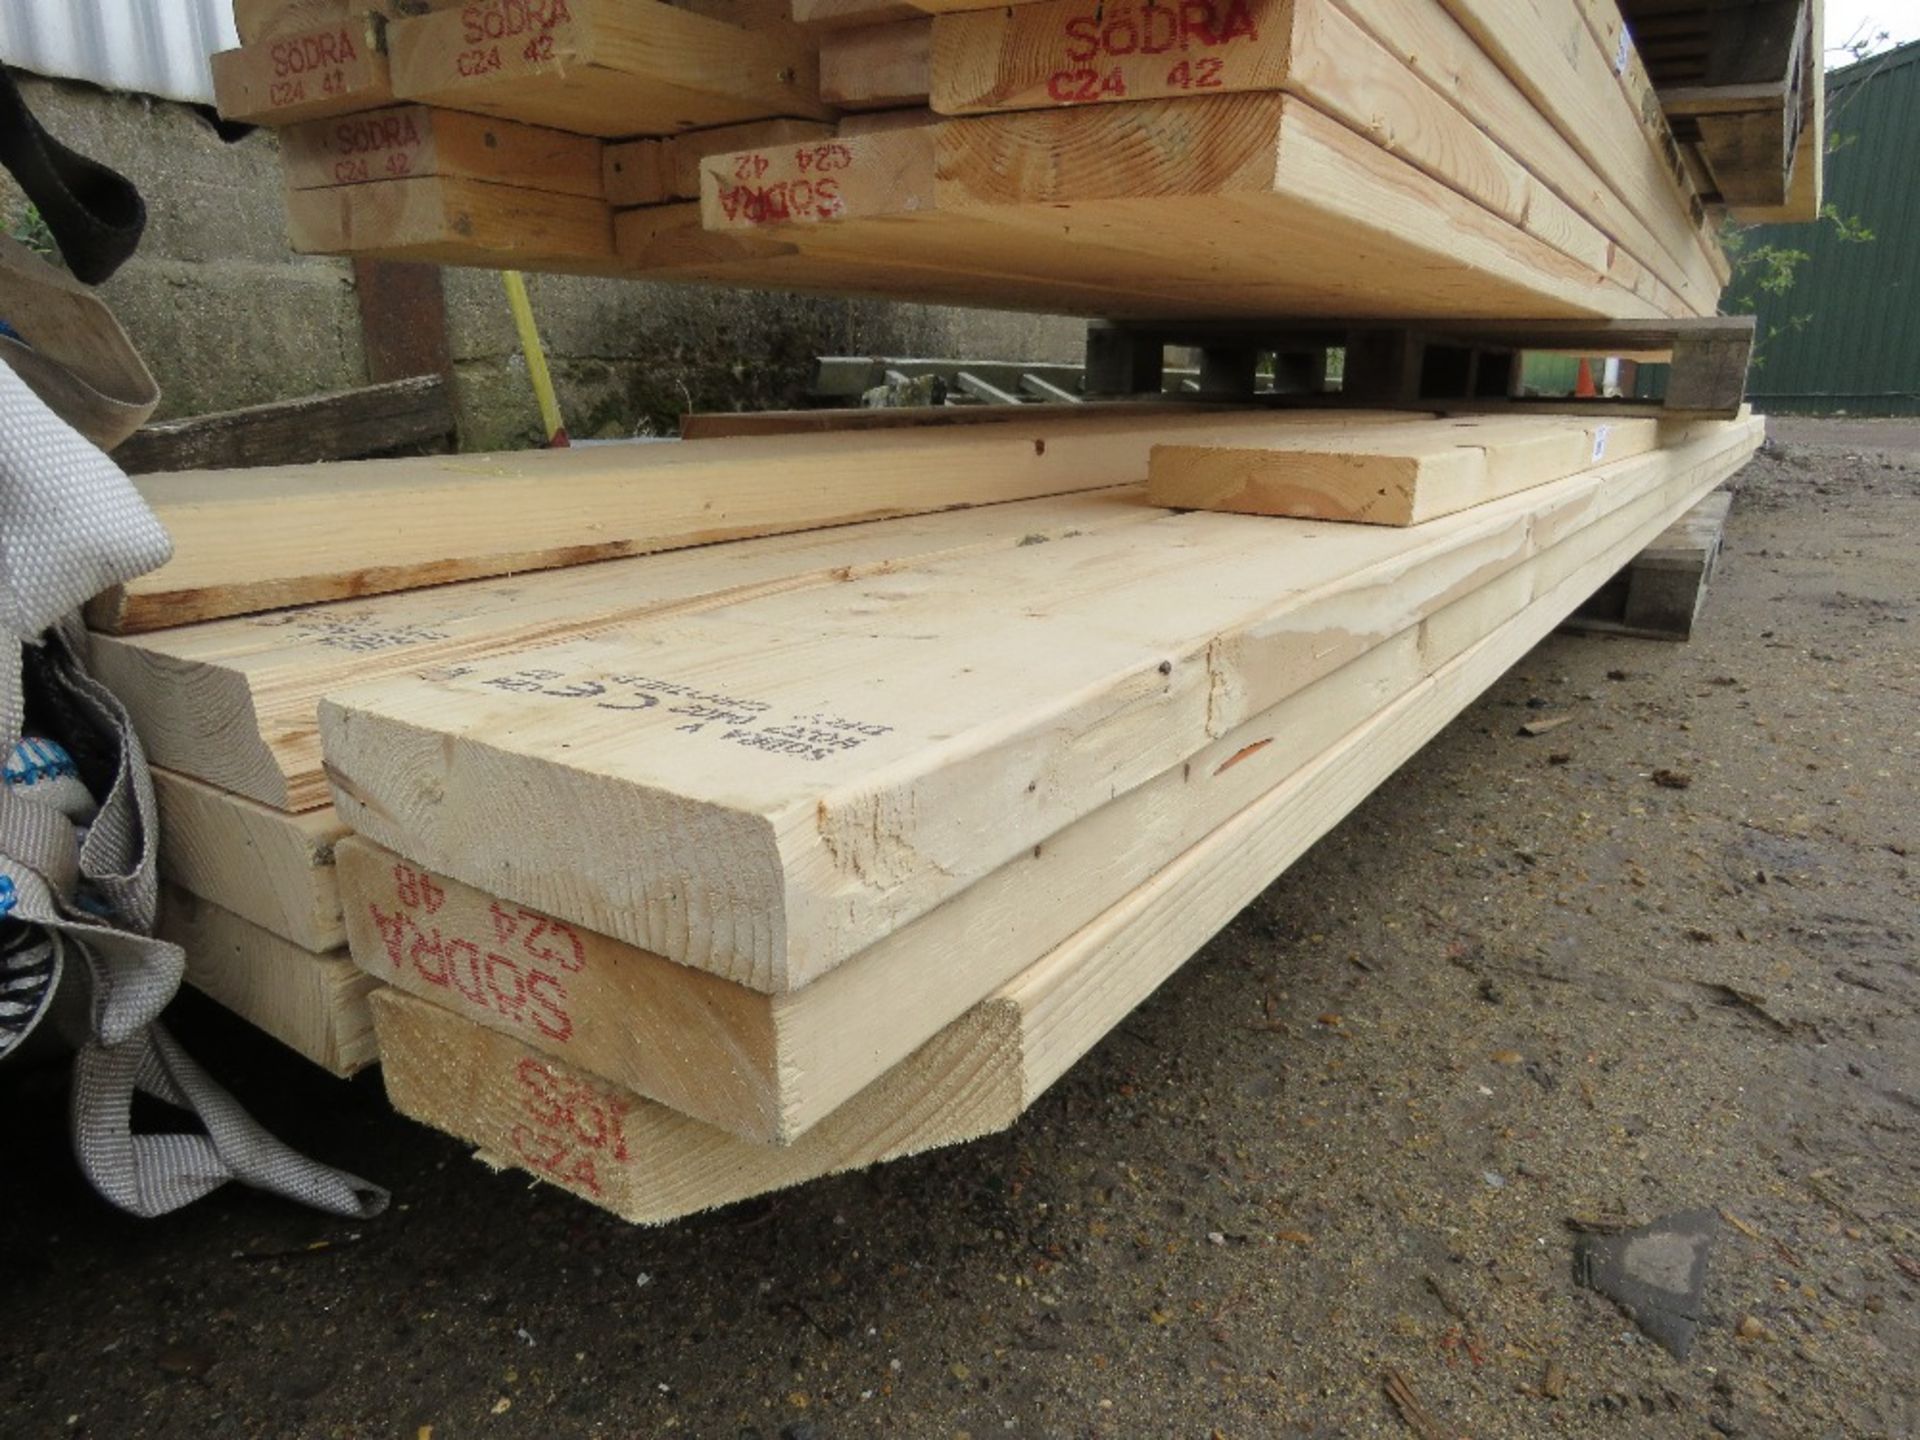 PALLET CONTAINING 8" X 2" TIMBERS: 3.4-4.2M LENGTH APPROX, 15NO PIECES IN TOTAL. SOURCED FROM DEMOL